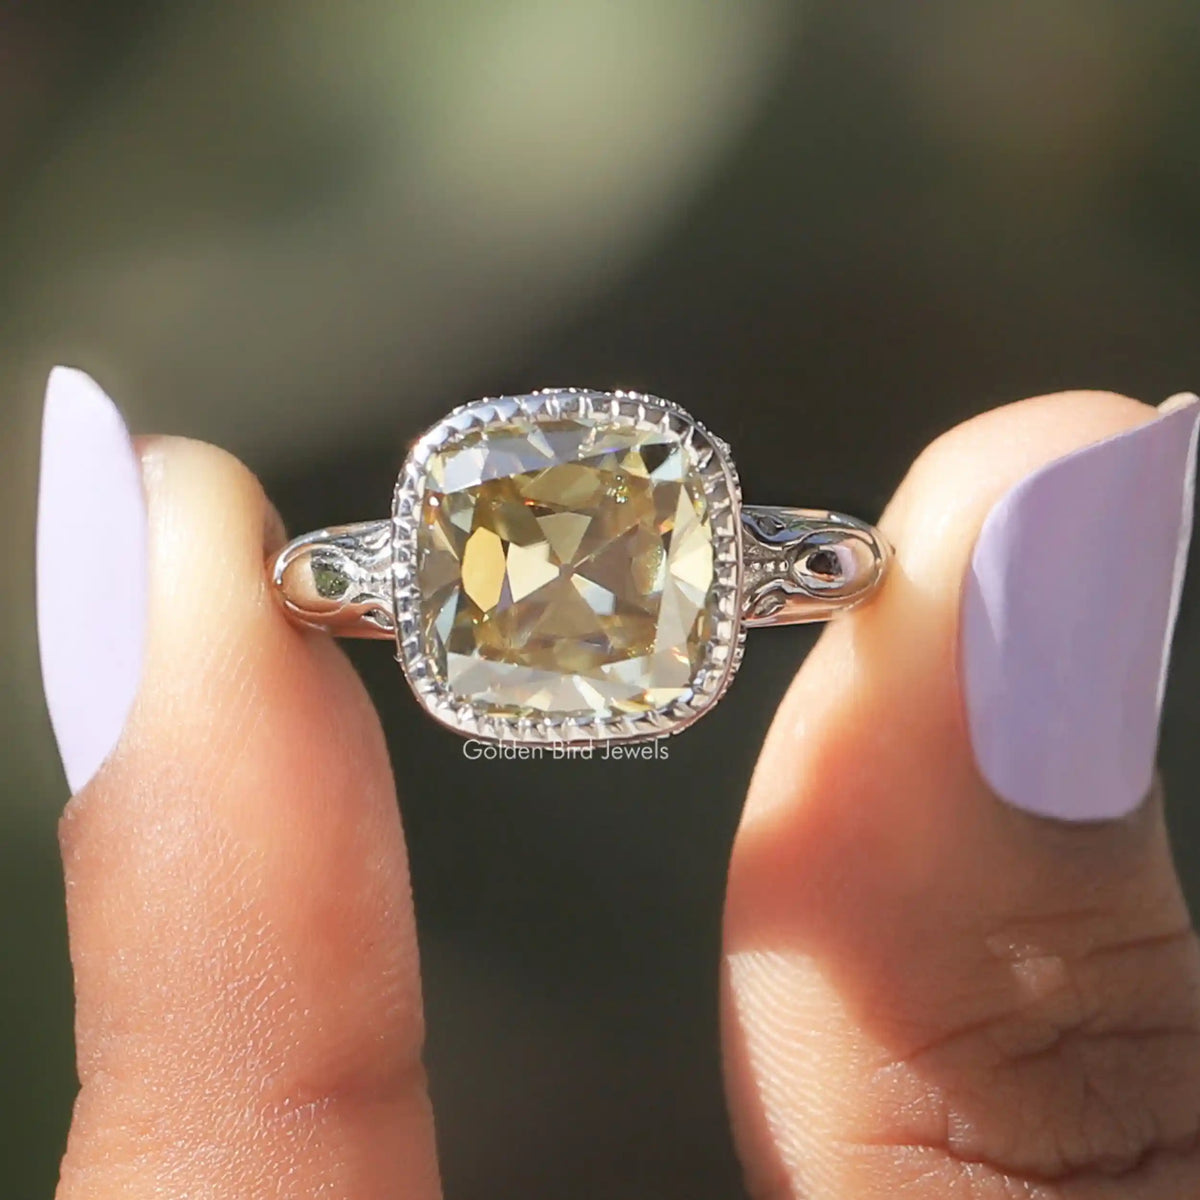 [In two finger front view of moissanite cushion cut engagement ring made of bezel setting]-[Golden Bird Jewels]